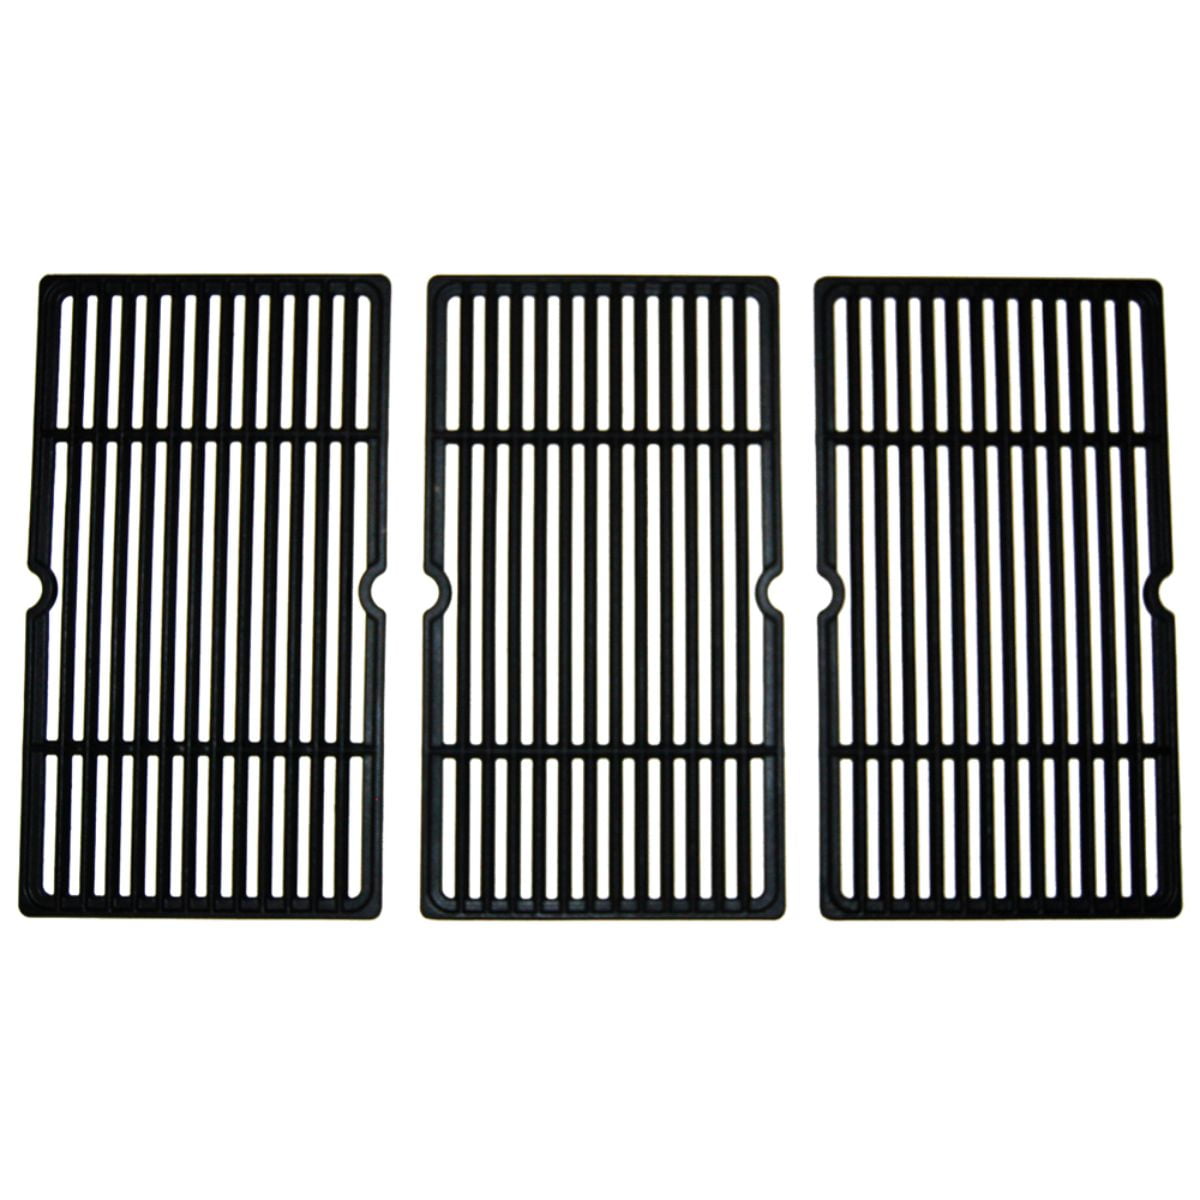 Music City Metals 68763 Matte Cast Iron Cooking Grid Replacement for Select Gas Grill Models by Charbroil Set of 3 Kenmore and Others 